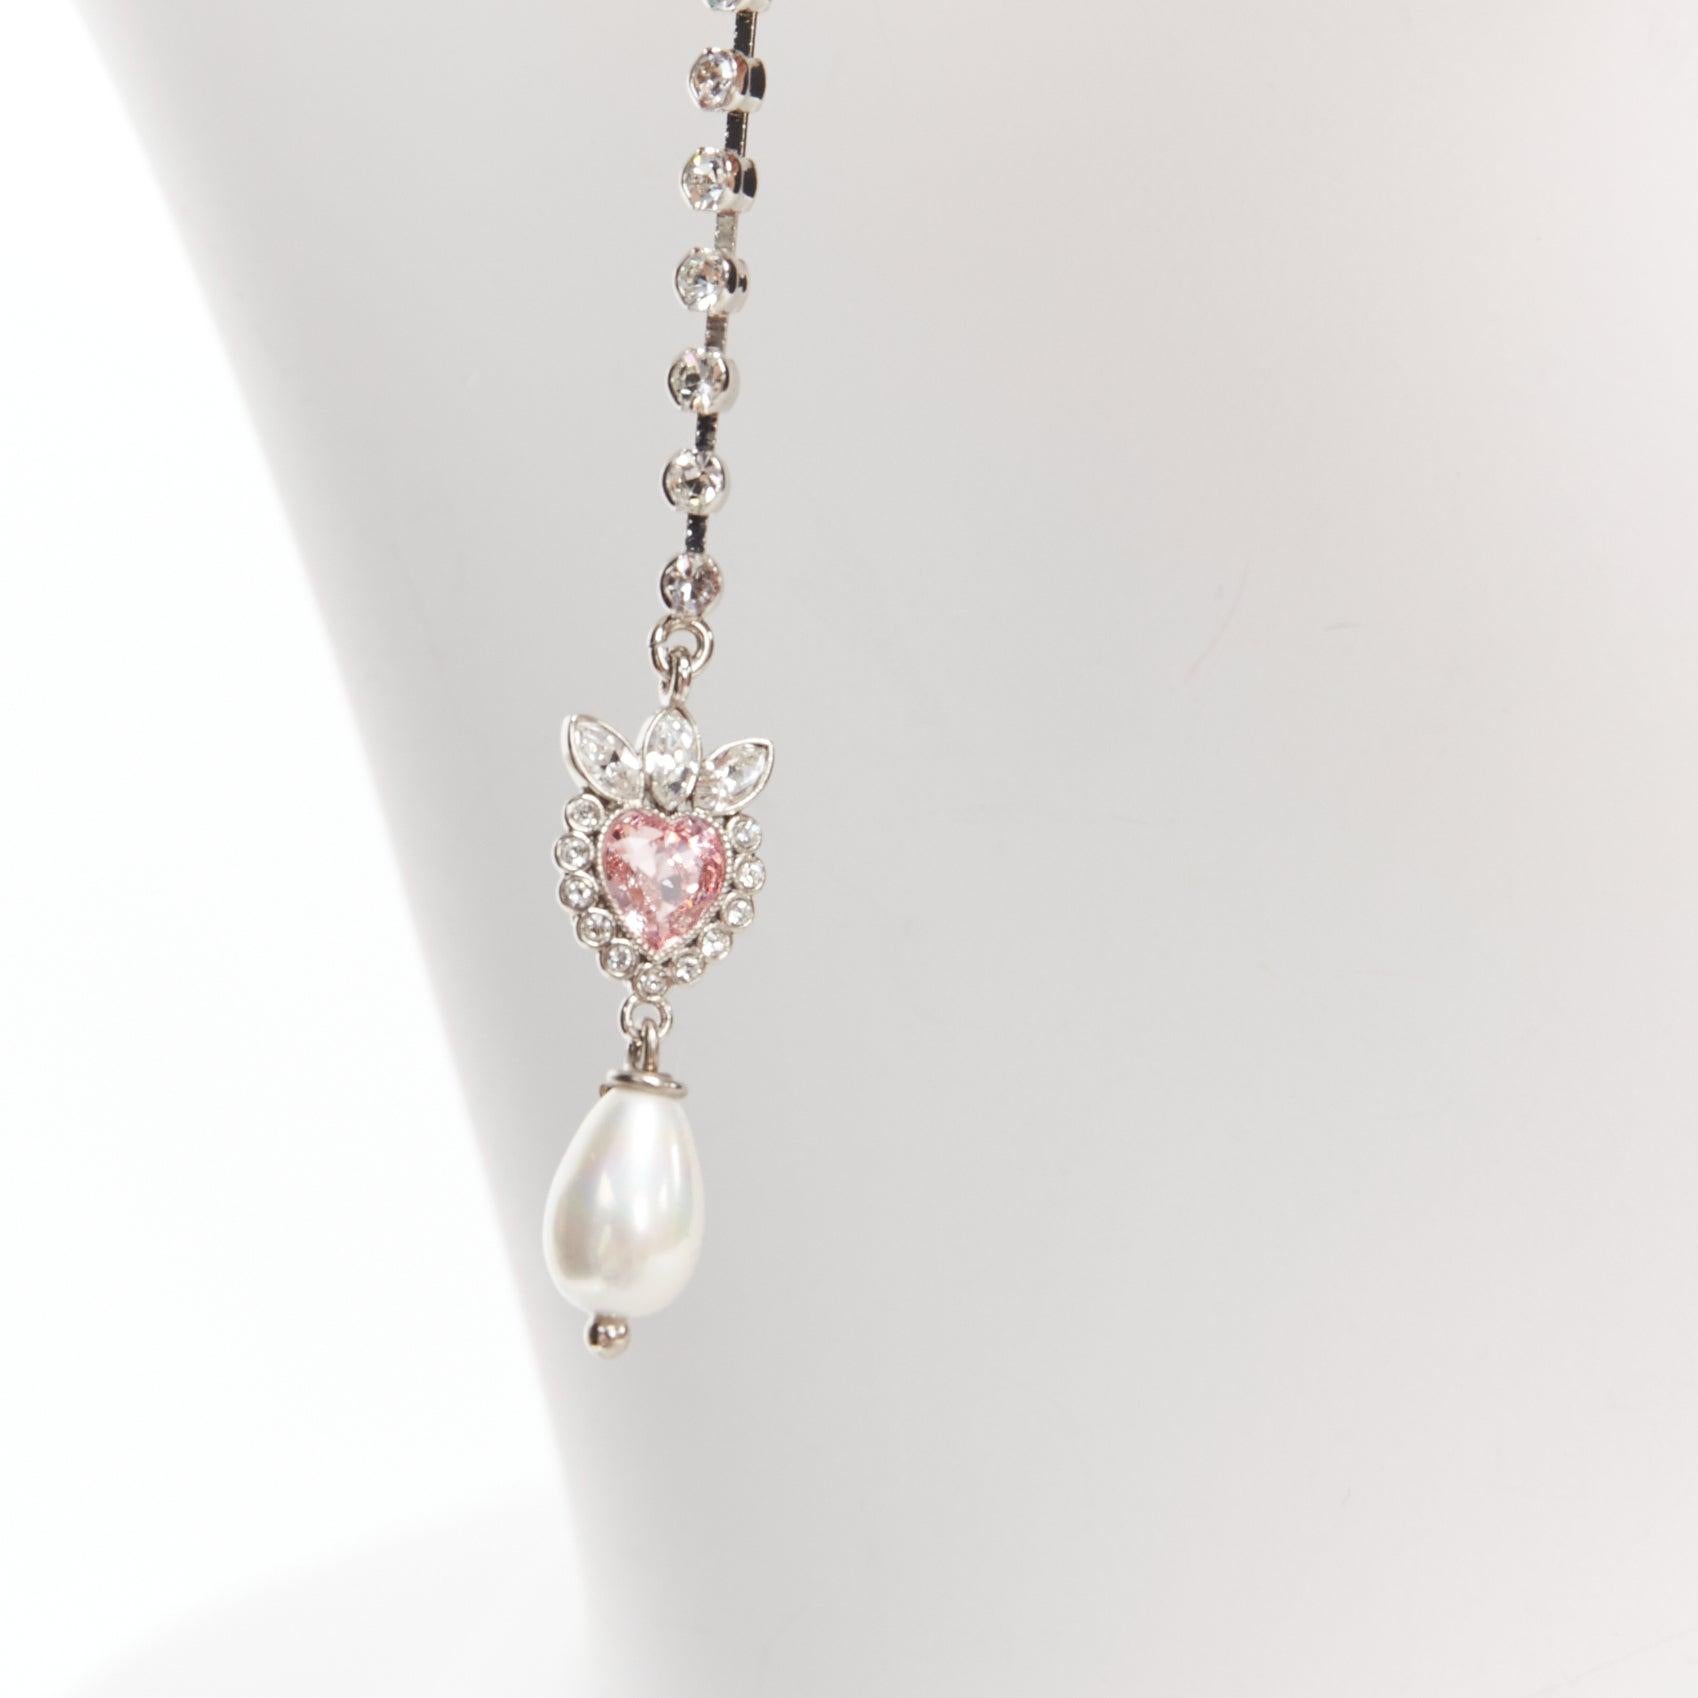 GUCCI Alessandro Michele pink heart crystal GG logo pearl dangling charm hairband
Reference: TGAS/D00466
Brand: Gucci
Designer: Alessandro Michele
Material: Metal, Faux Pearl
Color: Pink, Silver
Pattern: Solid
Closure: Slip On
Extra Details: Heart